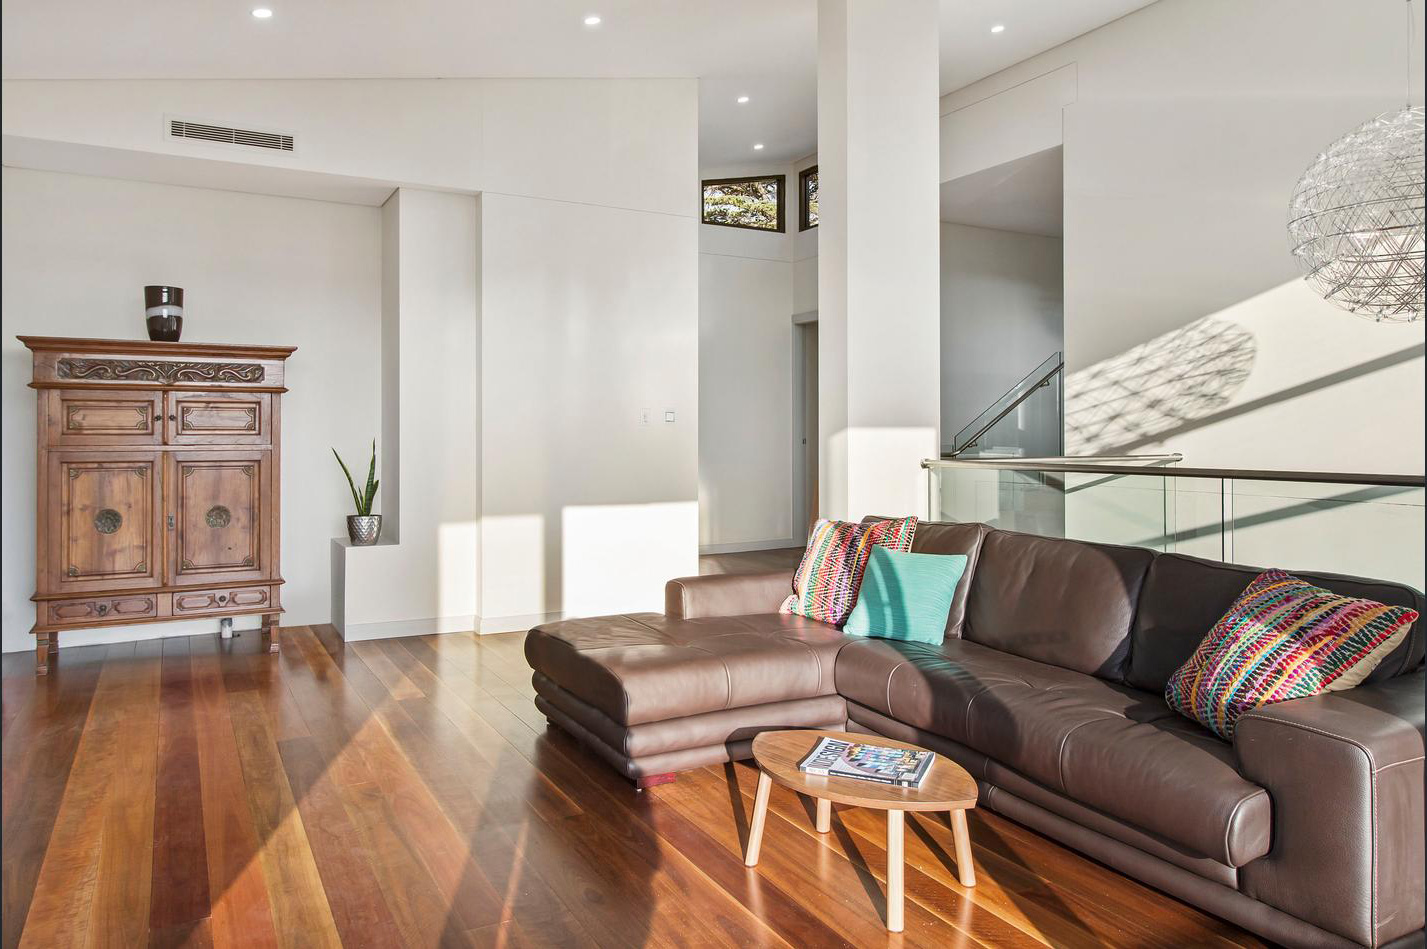 Home styling for sale Sydney Putney